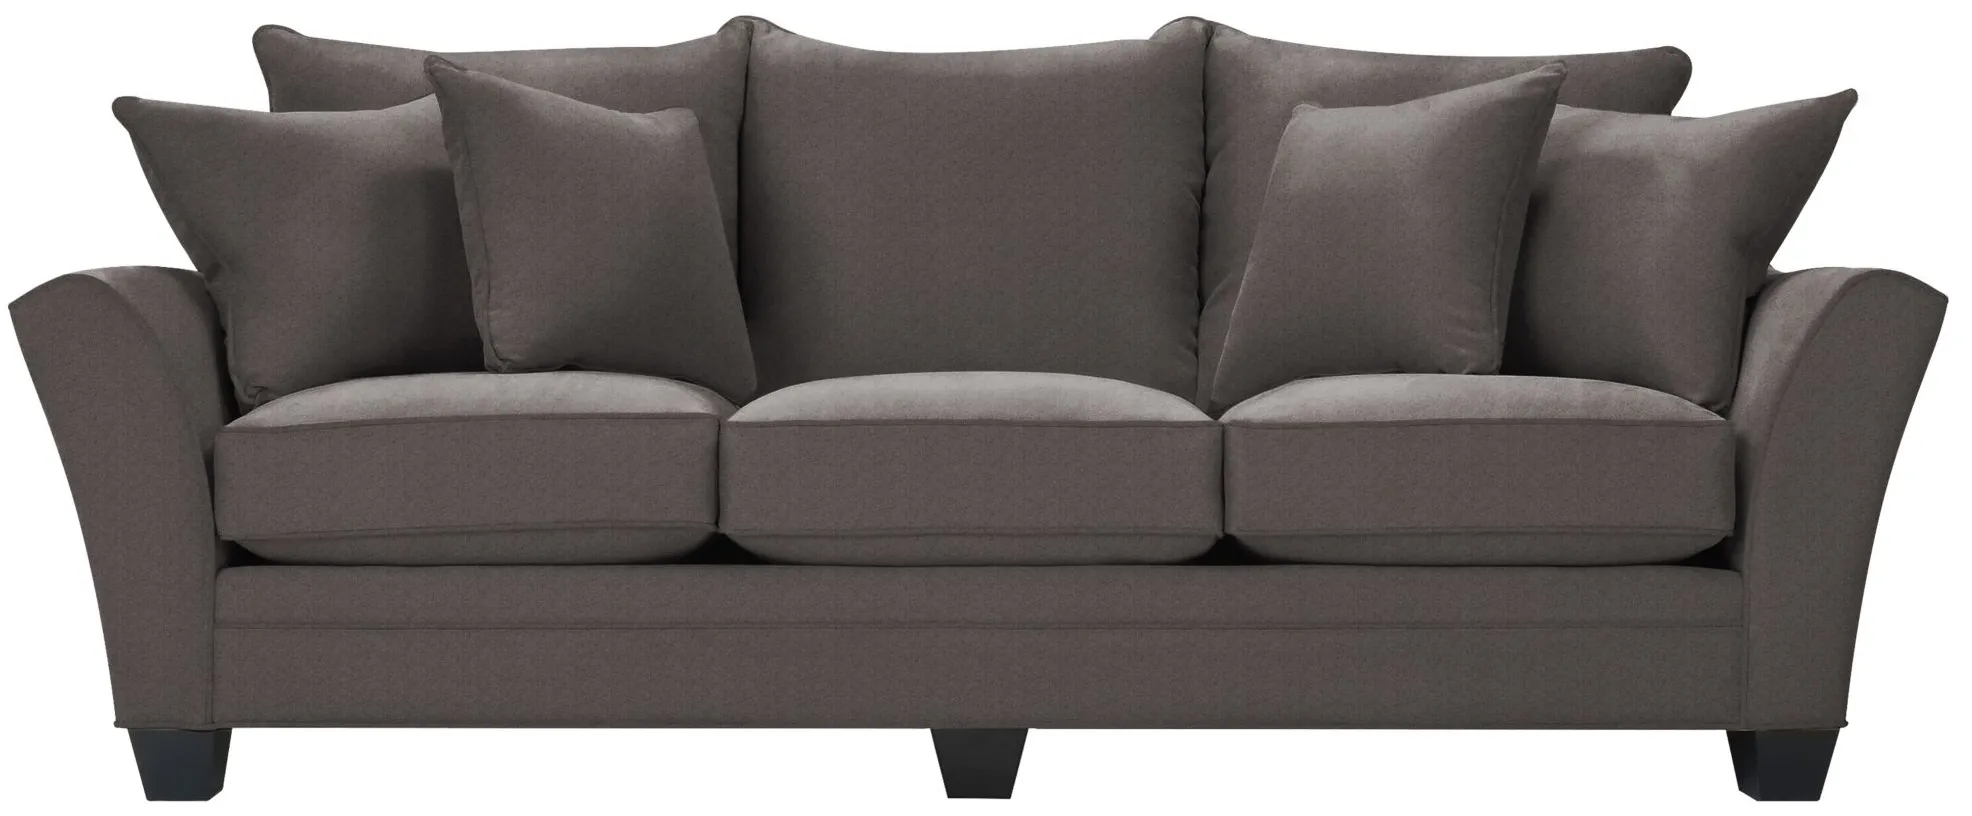 Briarwood Queen Plus Sleeper Sofa in Suede So Soft Slate by H.M. Richards